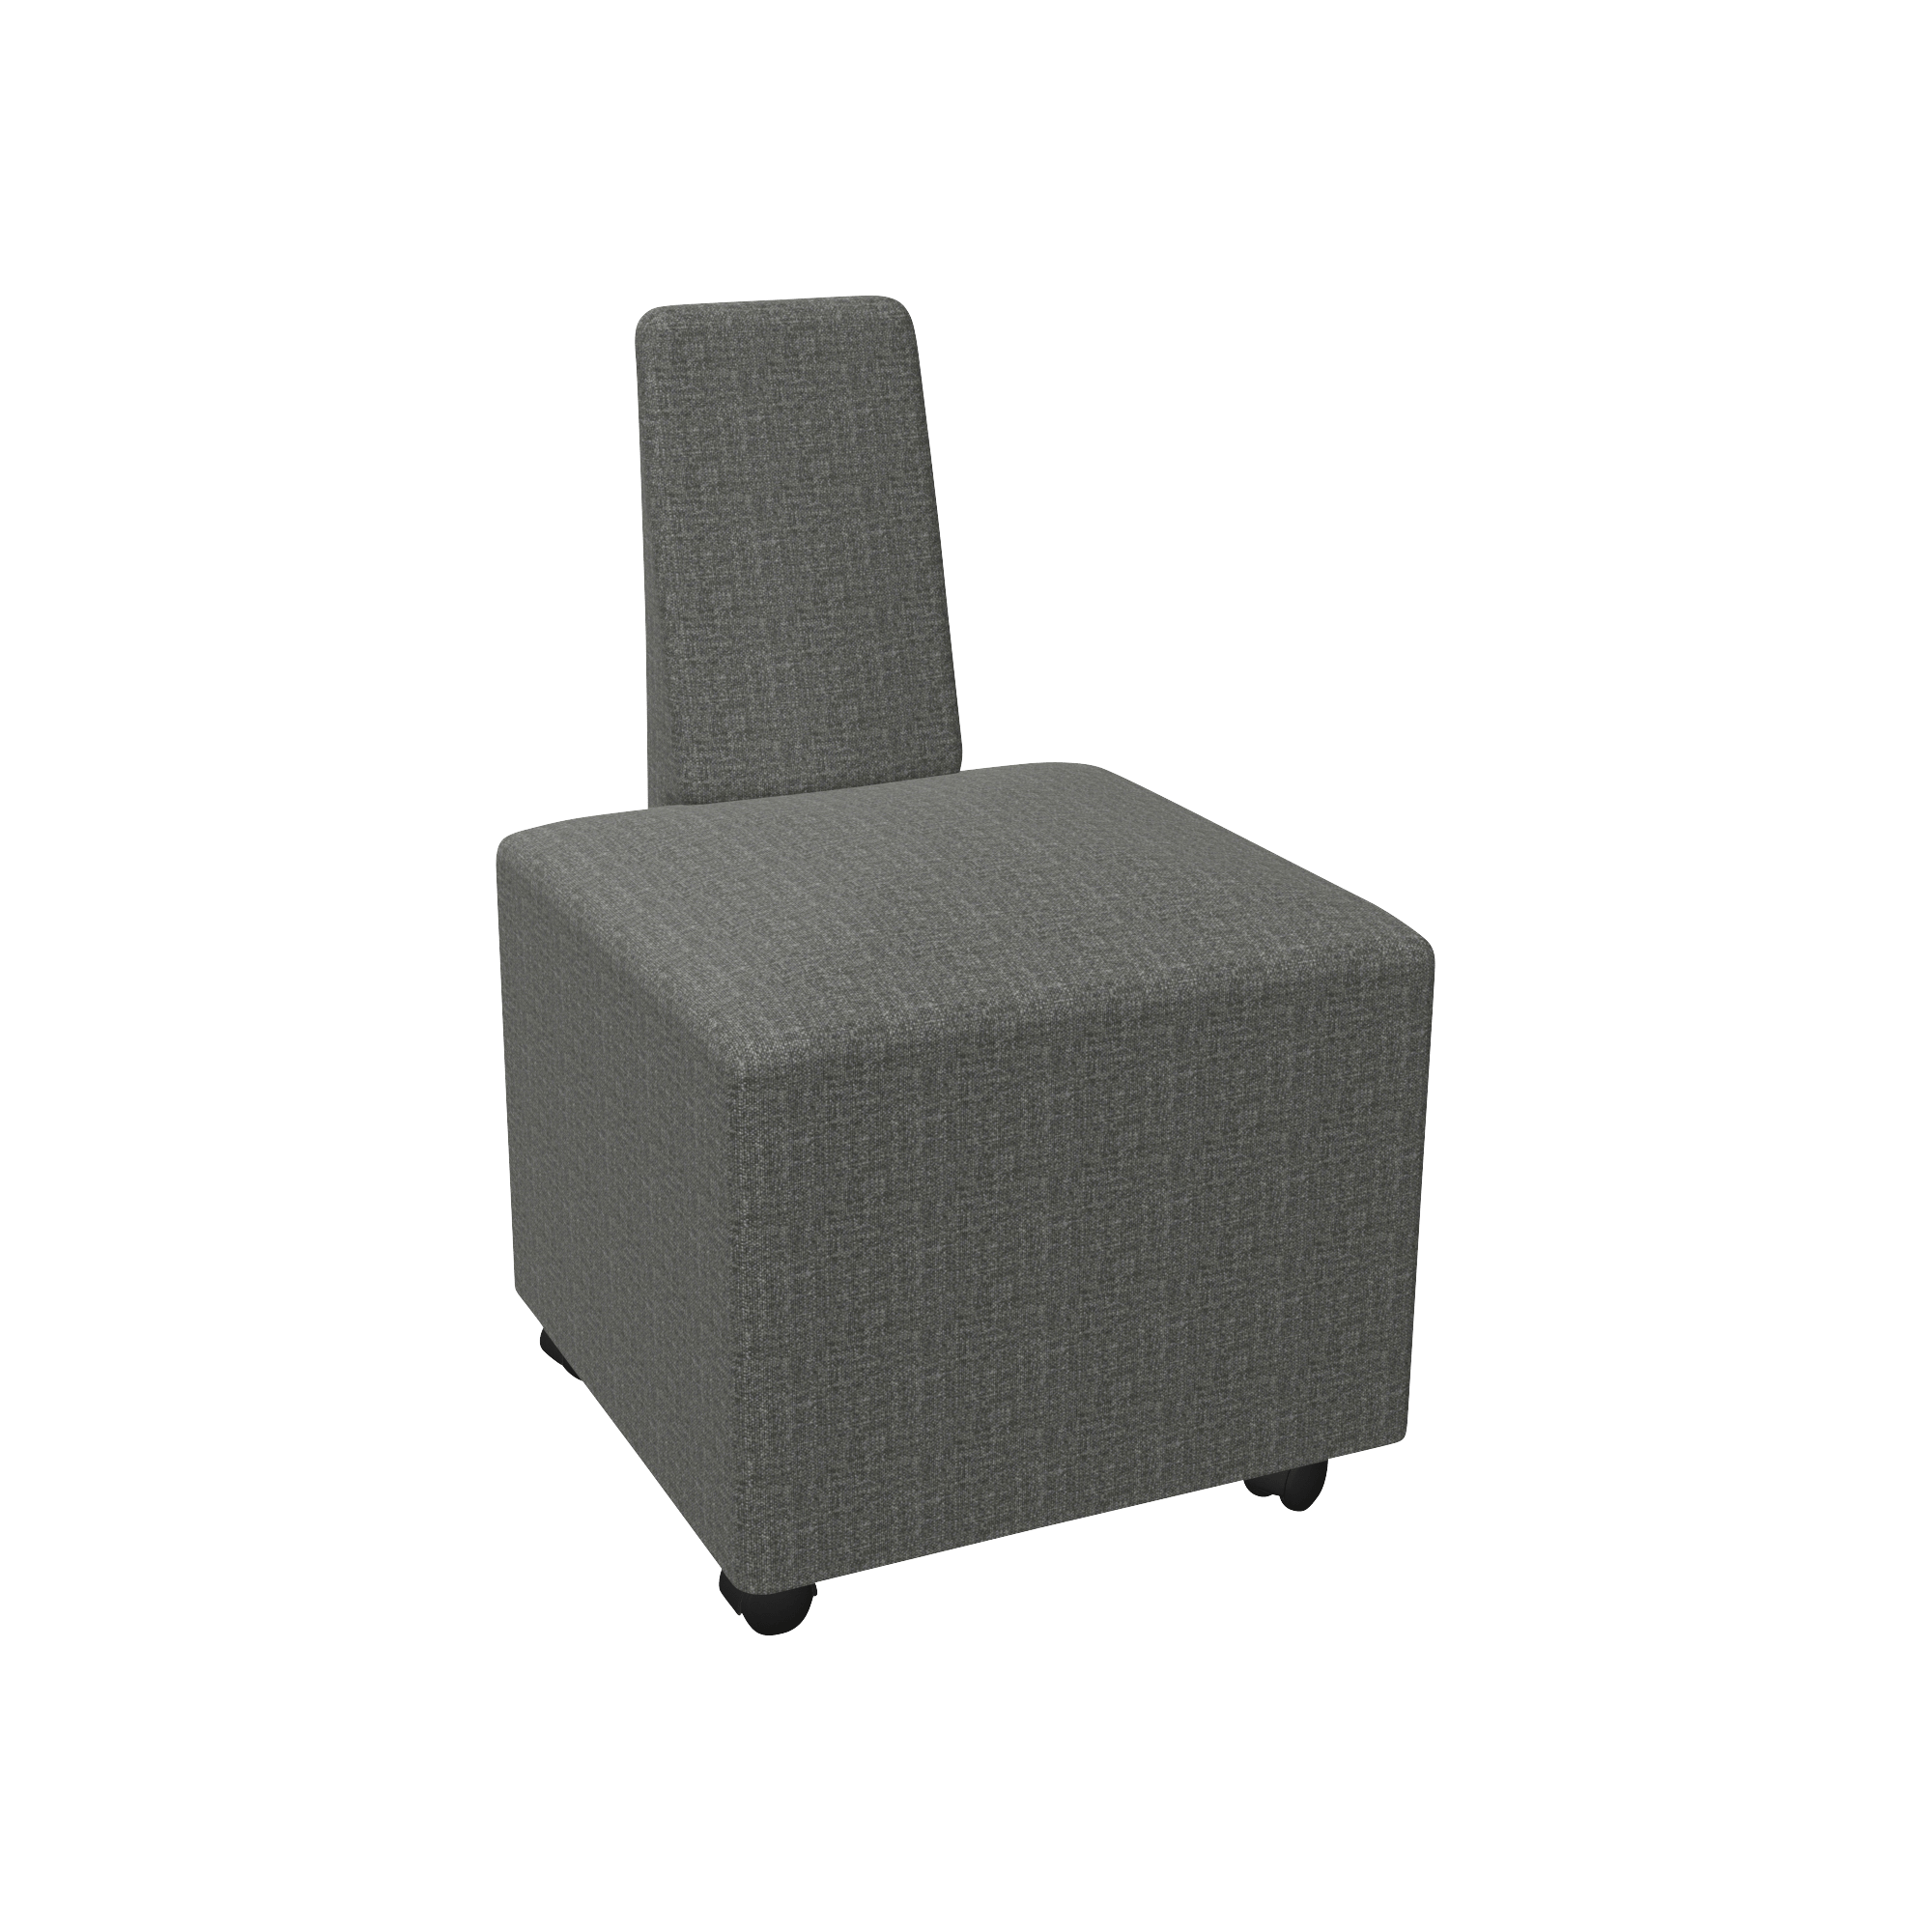 upholstered cubed chair with narrow back rest and wheels